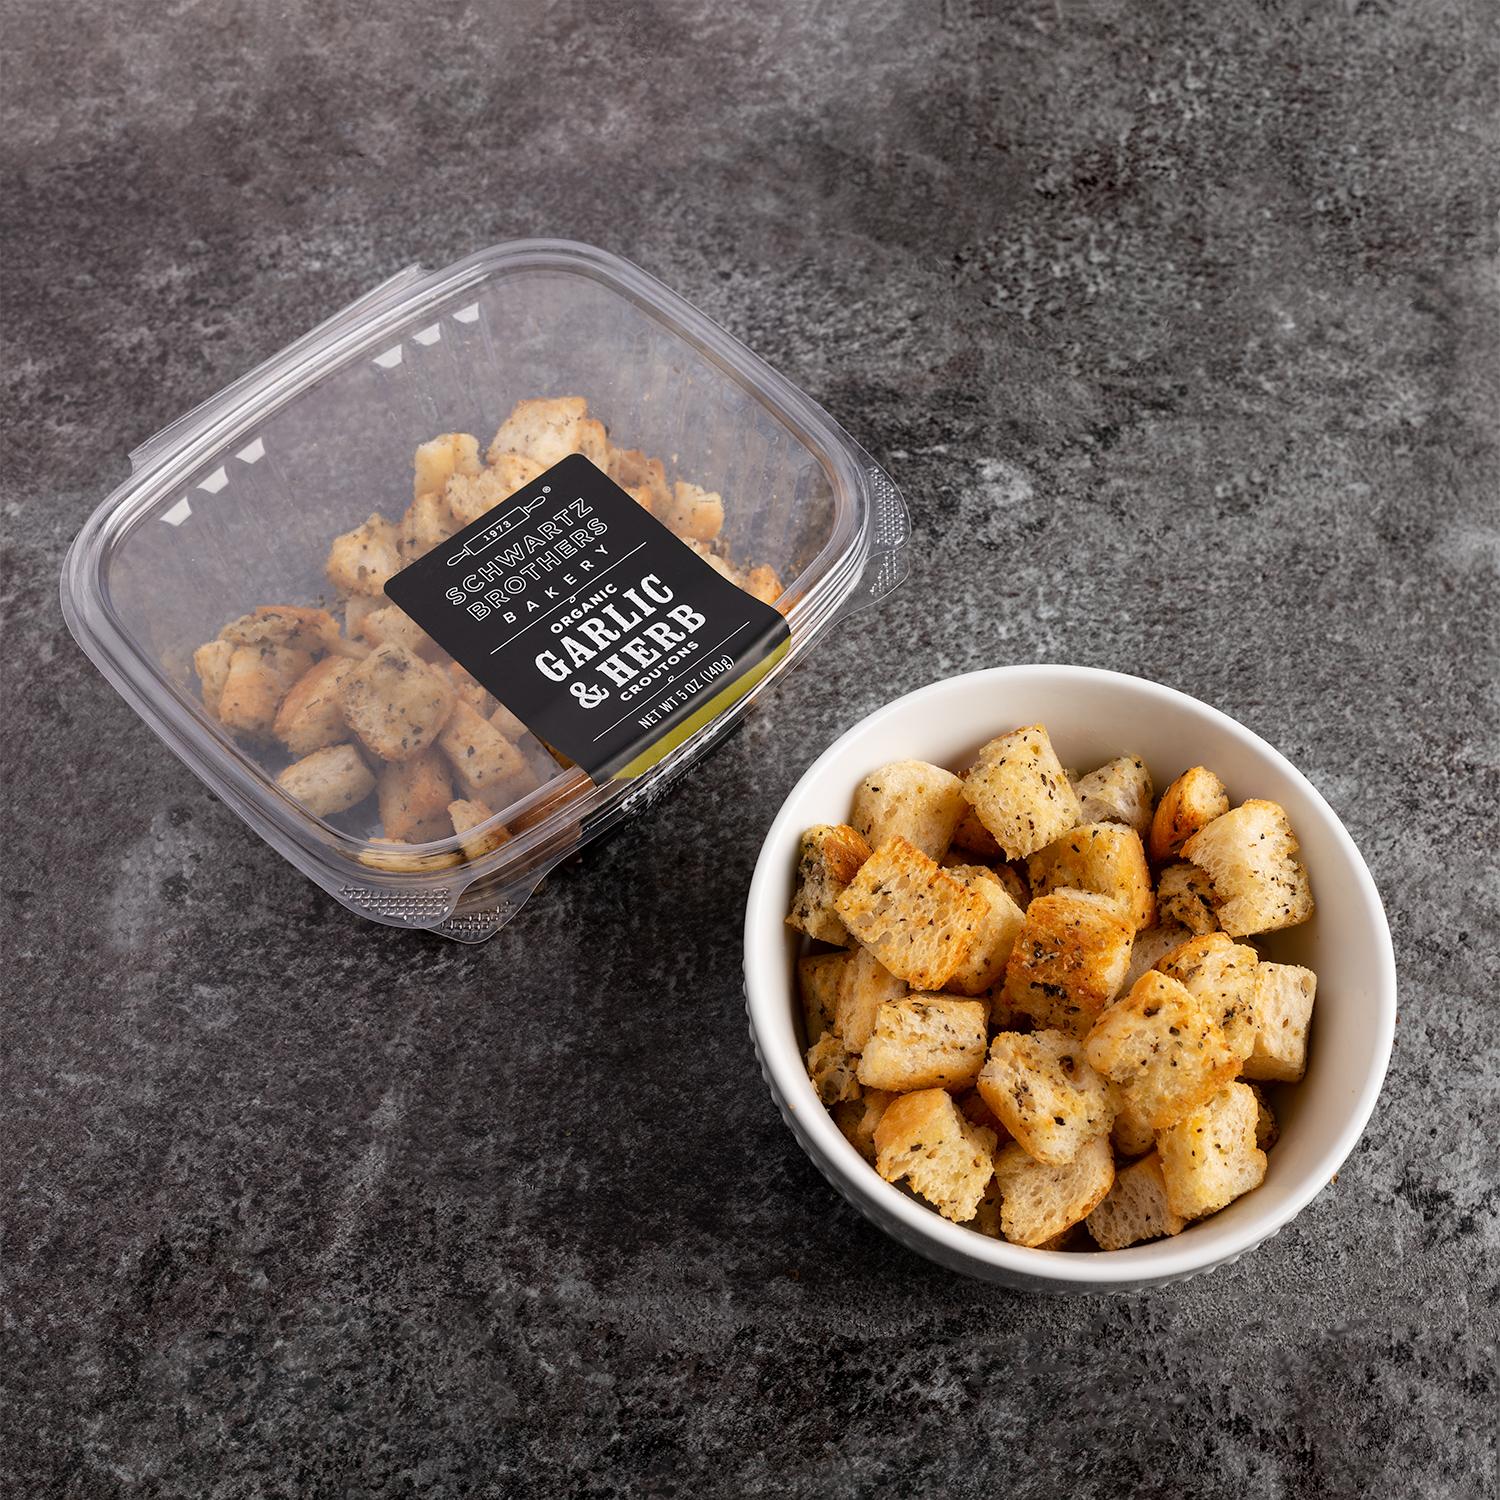 Garlic and Herb Croutons in a bowl next to a half-empty package